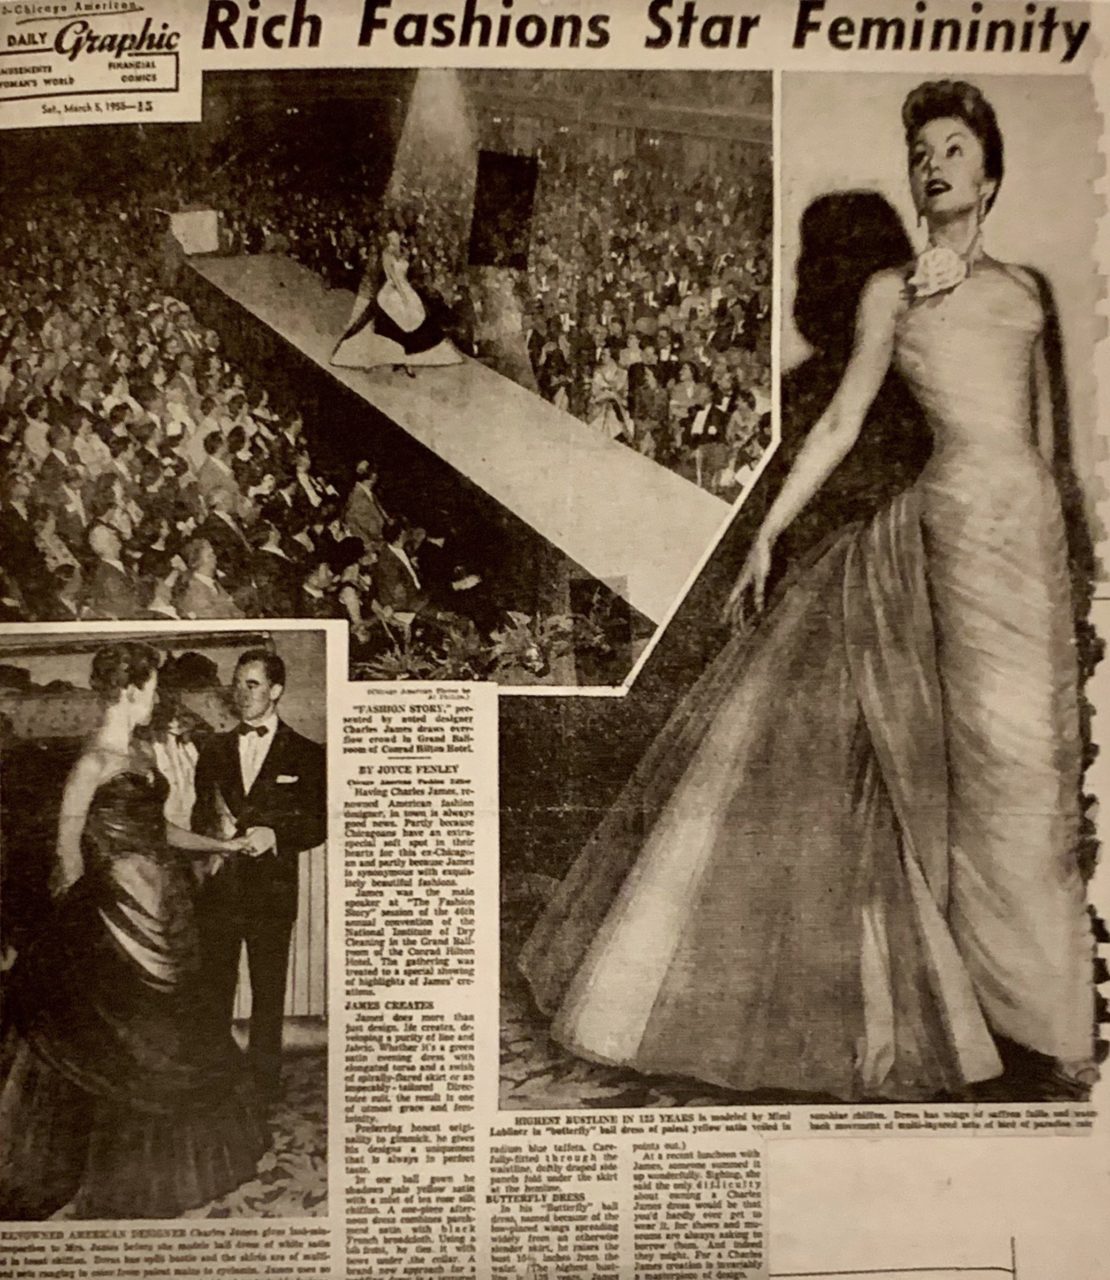 James' fashion at the 1955 convention of dry cleaners garnered full-page coverage in the Chicago American